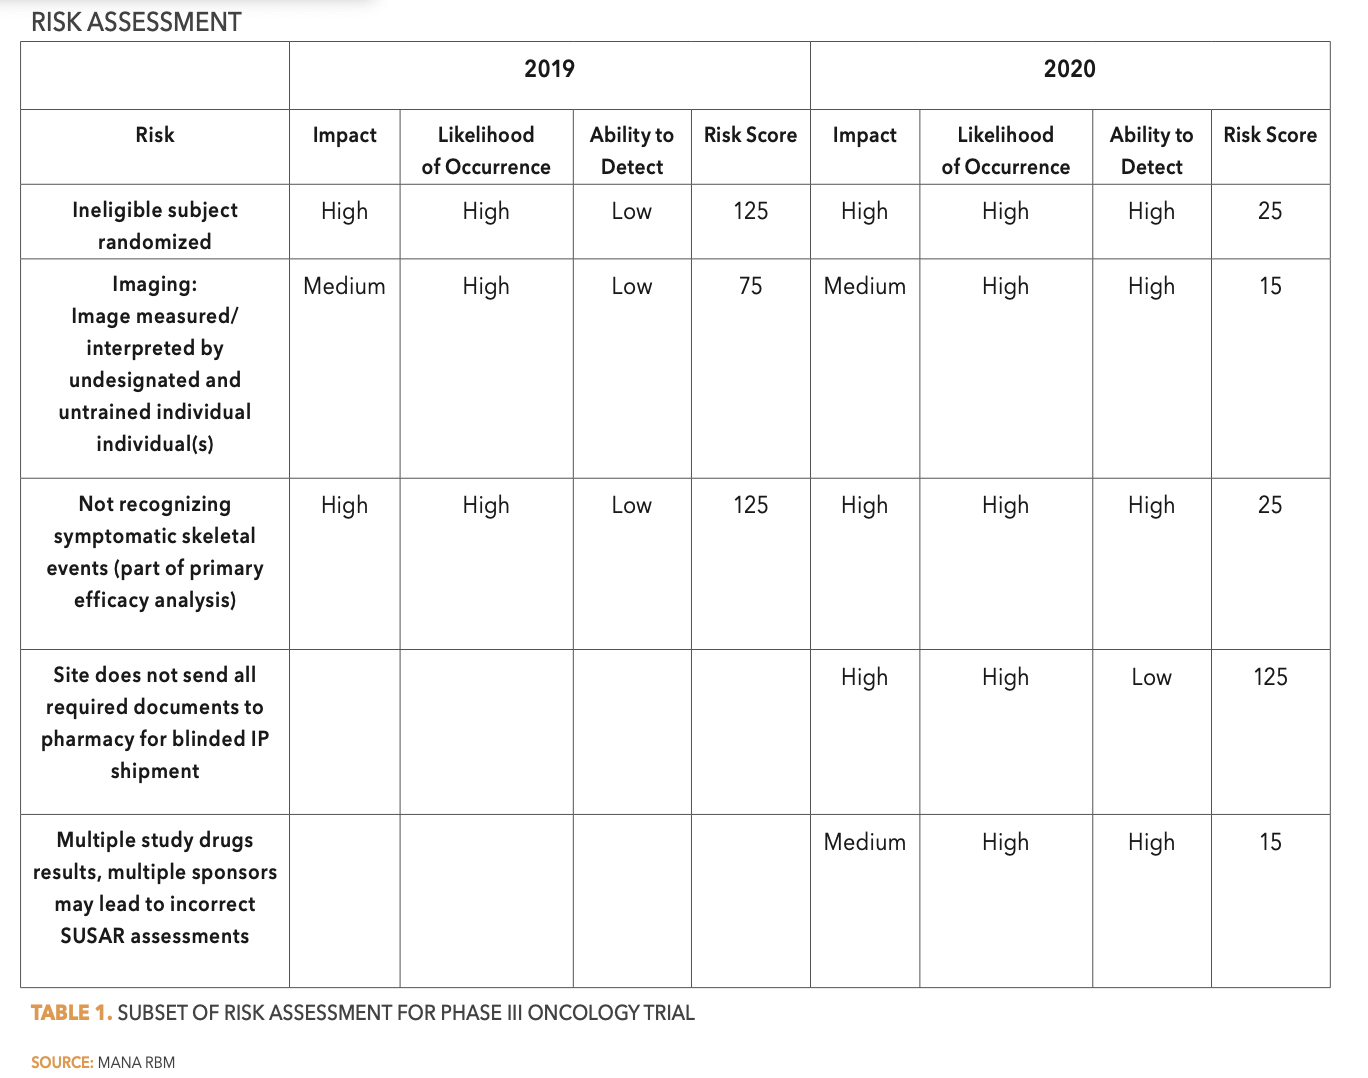 Table 1. Subset of Risk Assessment for Phase III Oncology Trial